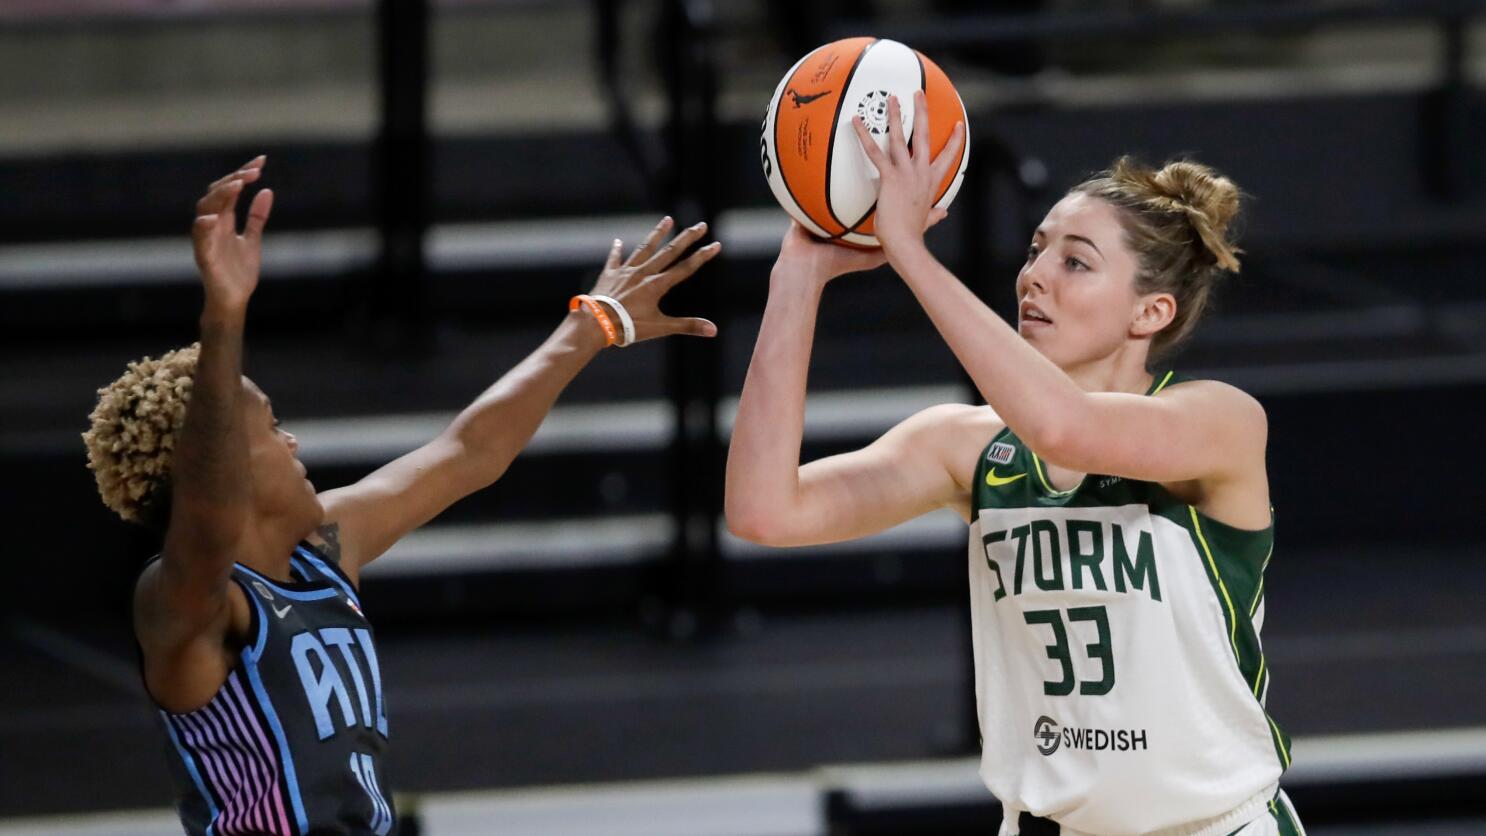 Storm trade Katie Lou Samuelson, No. 9 2022 draft pick to Los